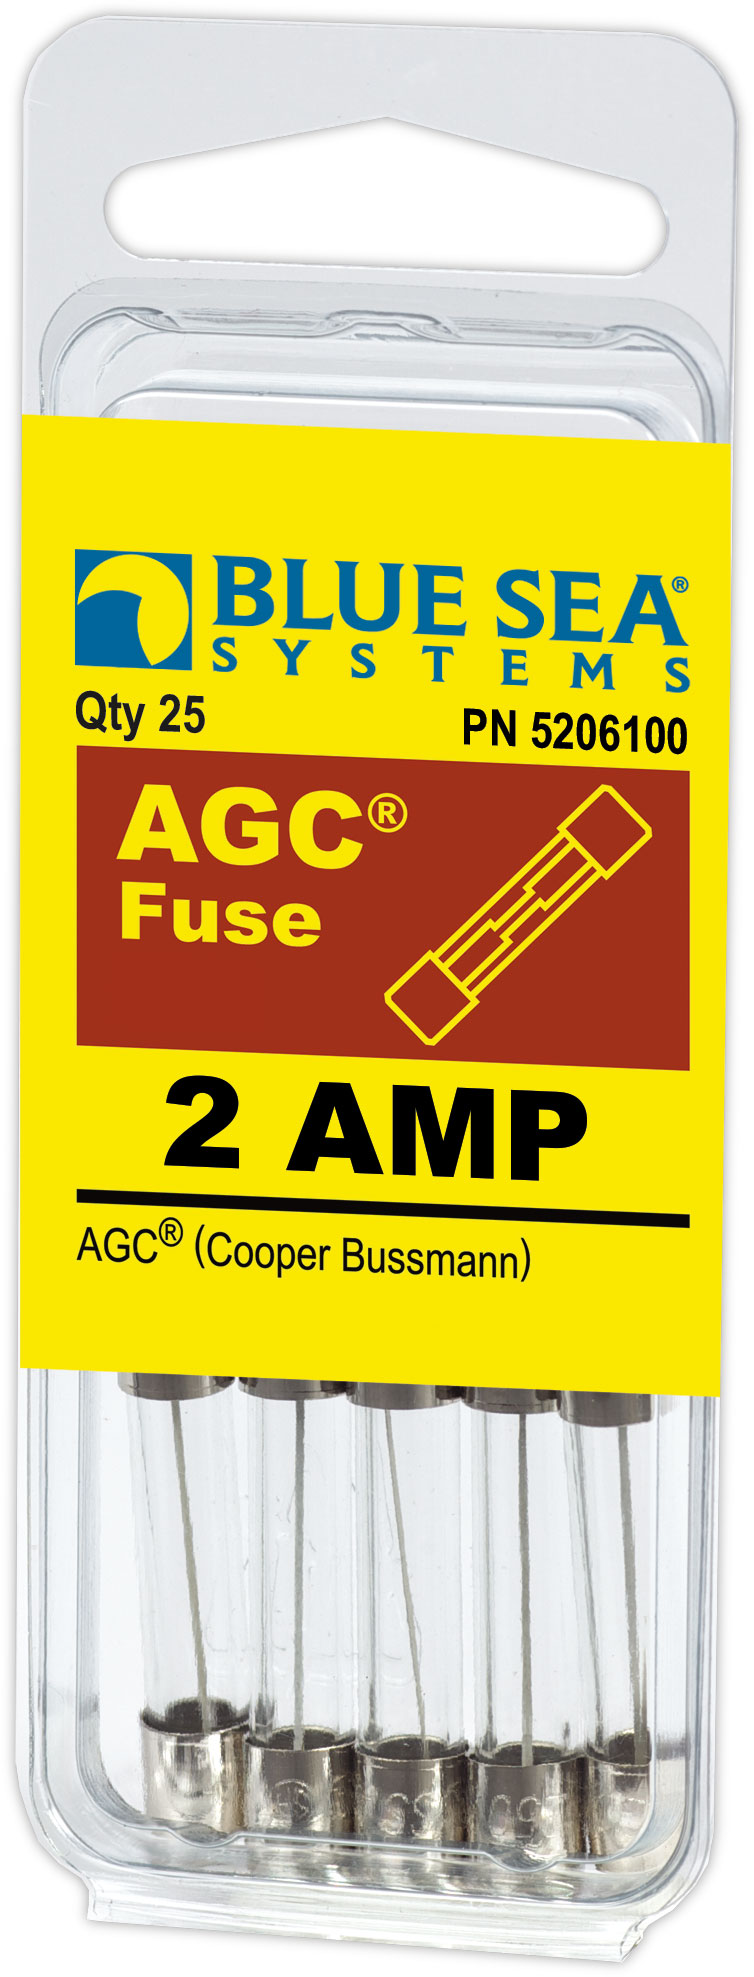 Part # 5206100  Manufacturer Blue Sea Systems  Product Type Fuse